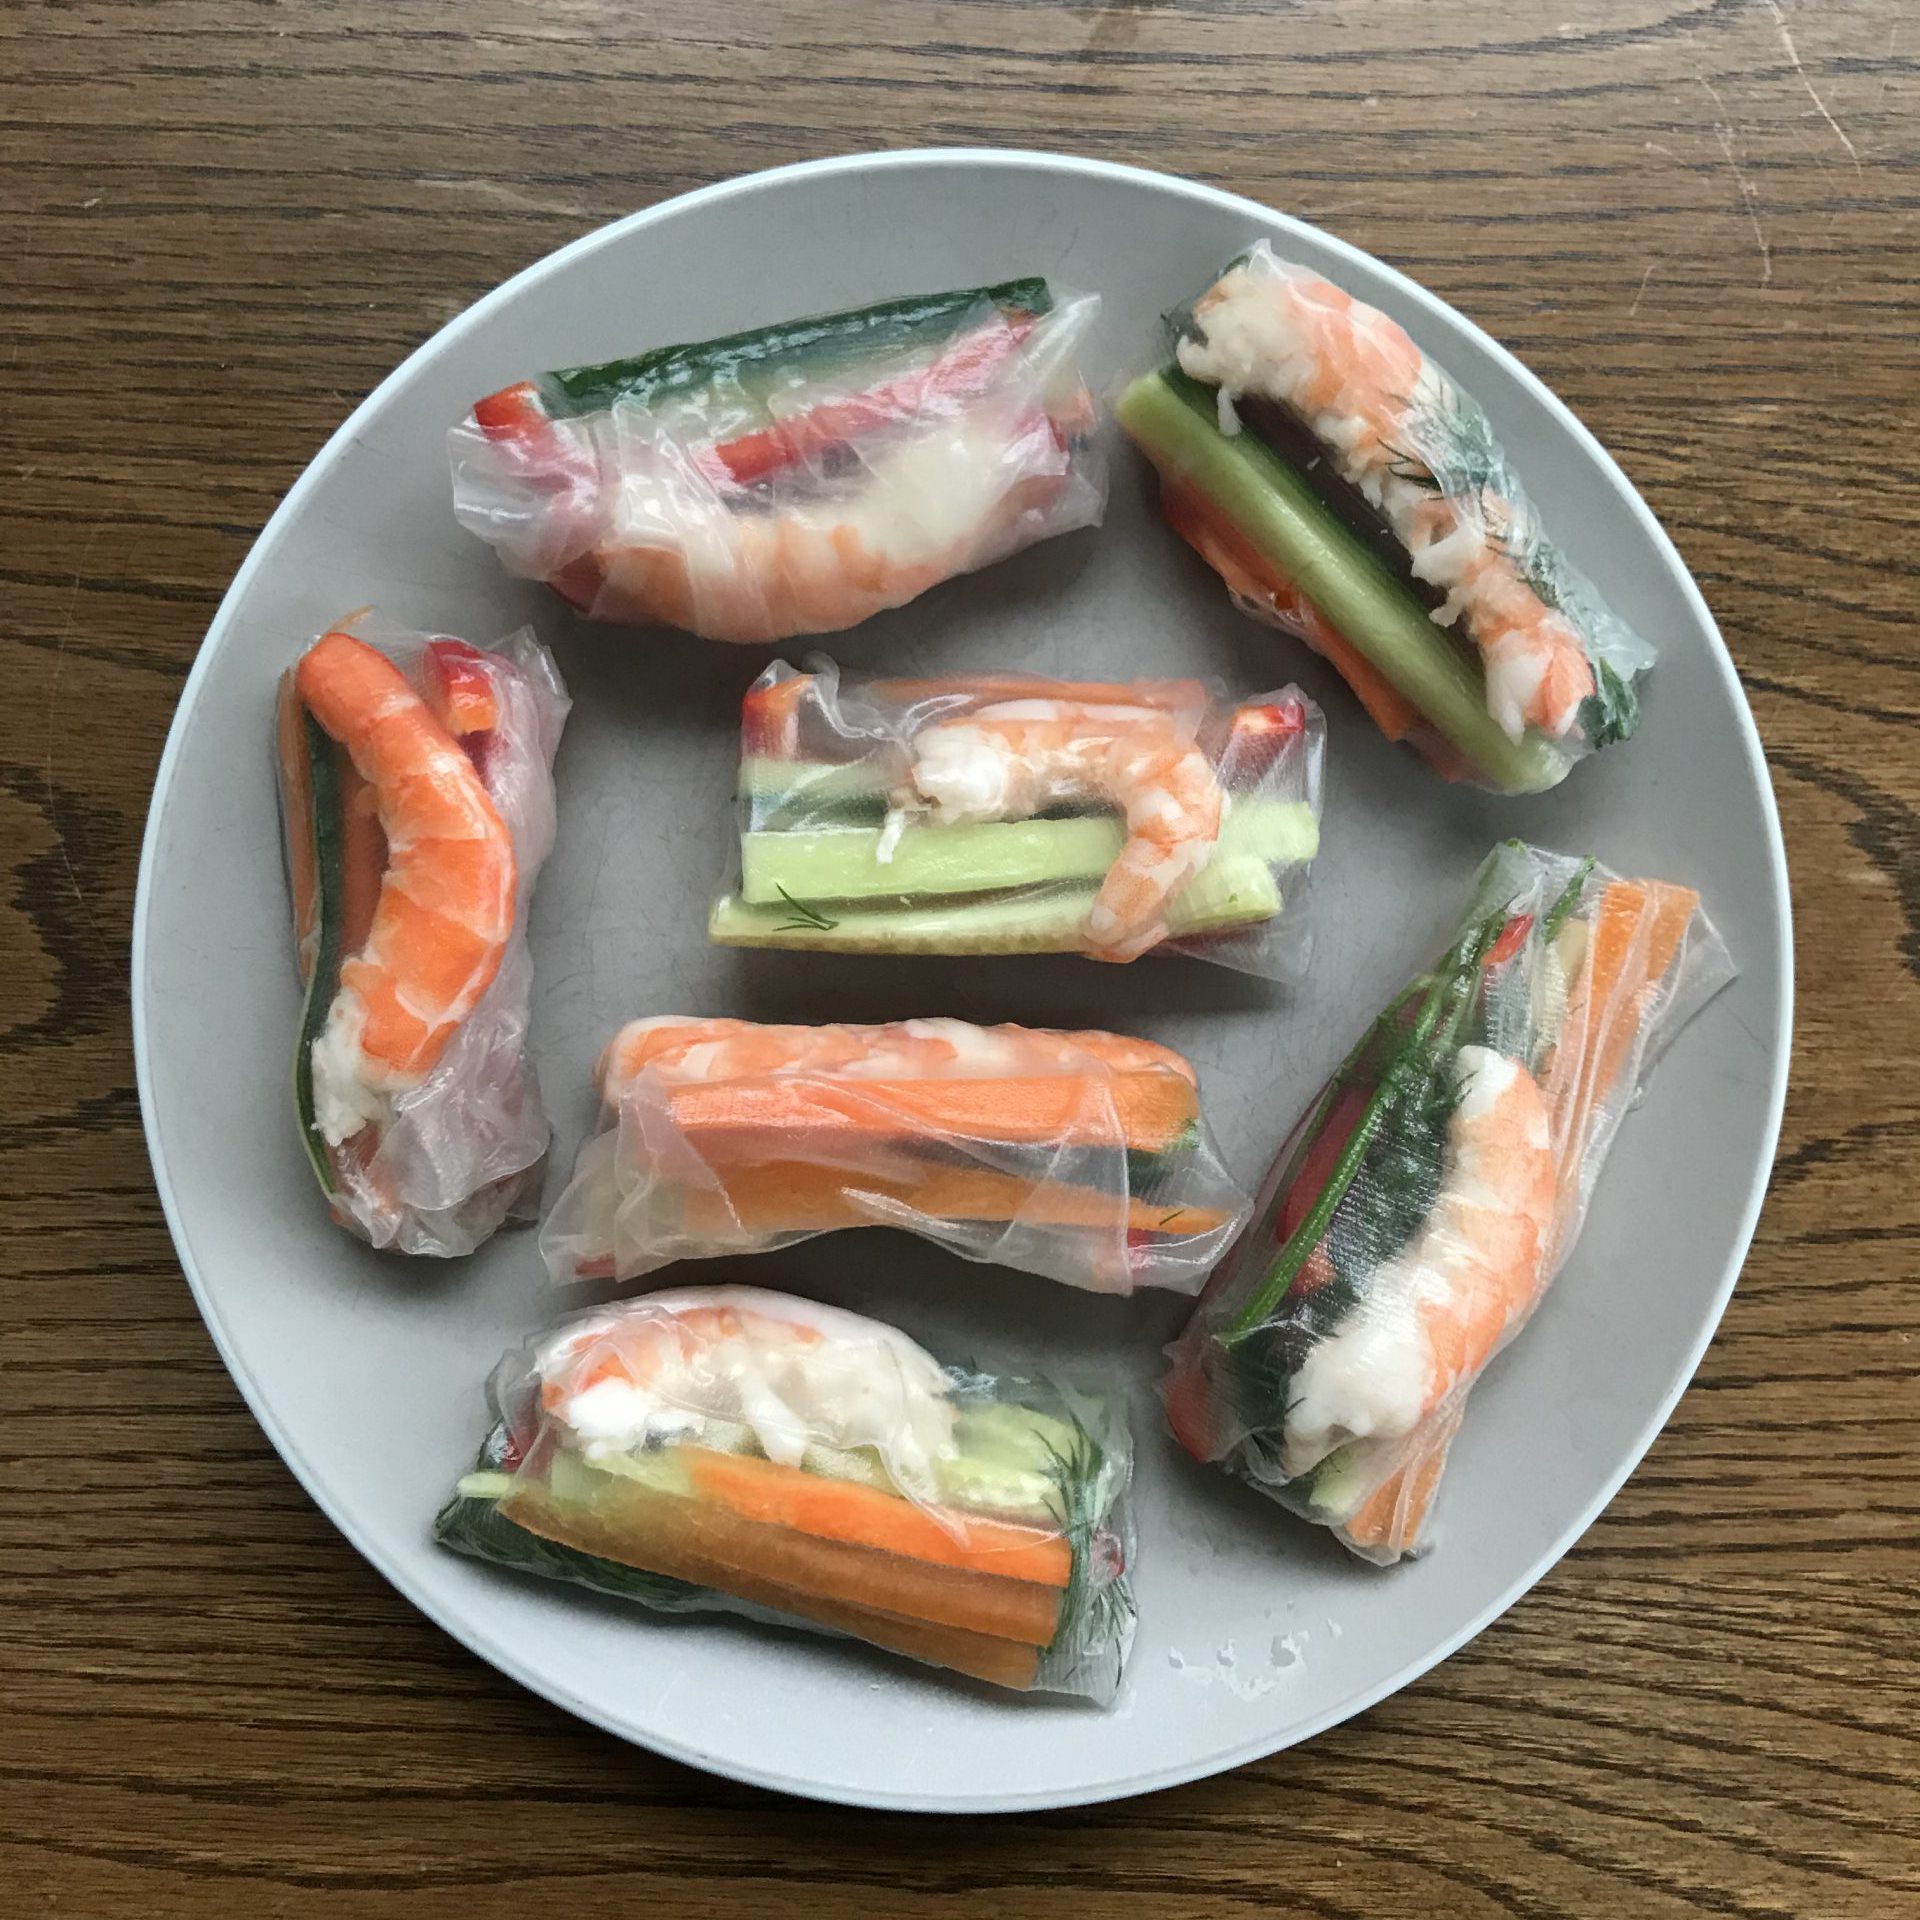 My First Attempt at Making Fresh Spring Rolls